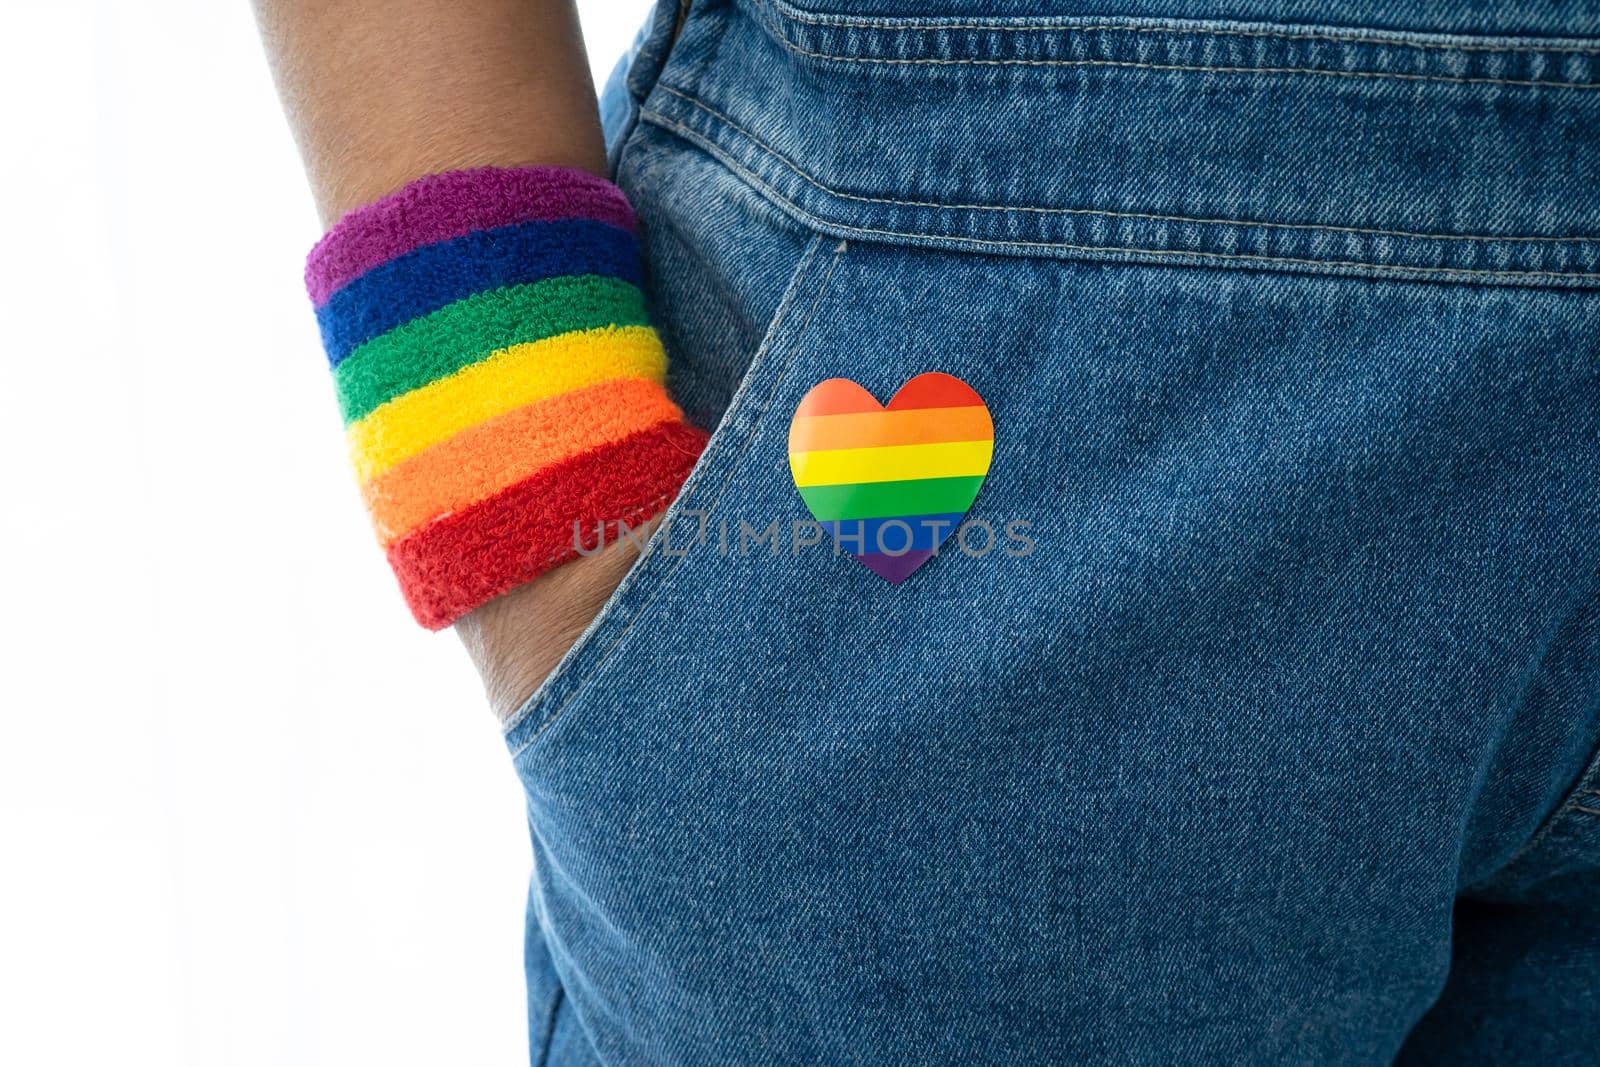 Asian lady wearing rainbow flag wristbands, symbol of LGBT pride month celebrate annual in June social of gay, lesbian, bisexual, transgender, human rights. by pamai